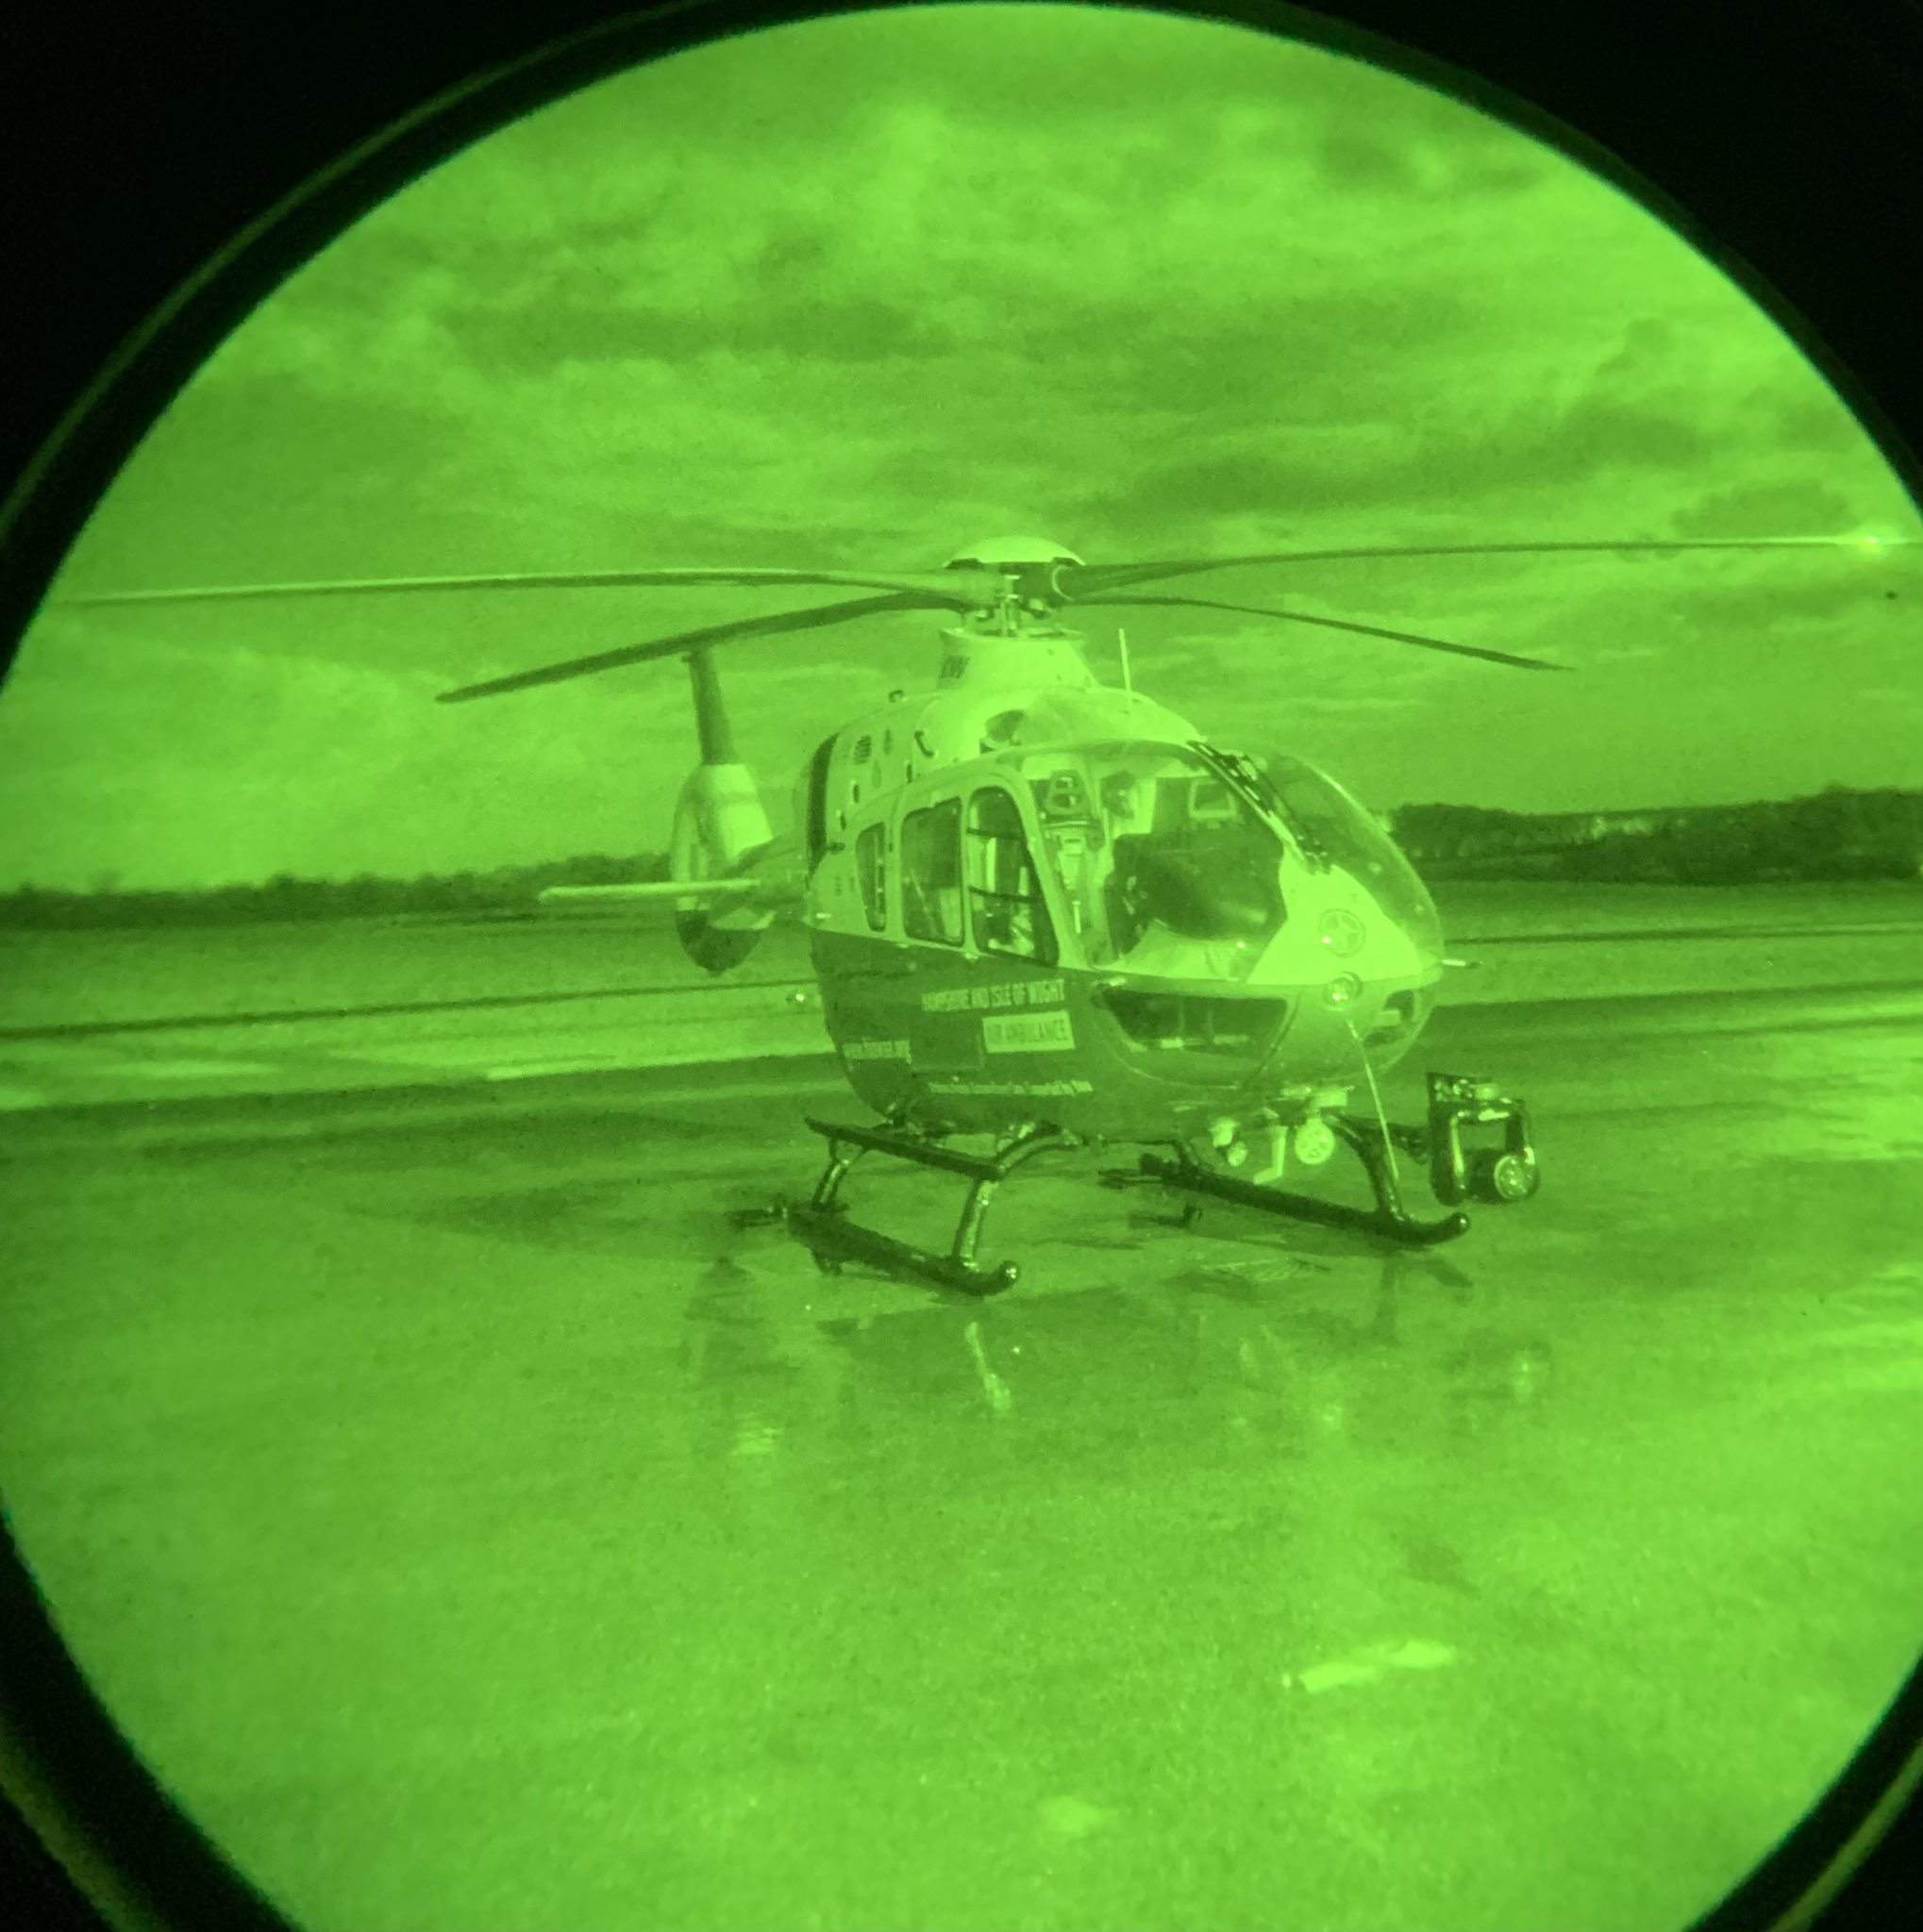 A helicopter through the view of night-vision goggles